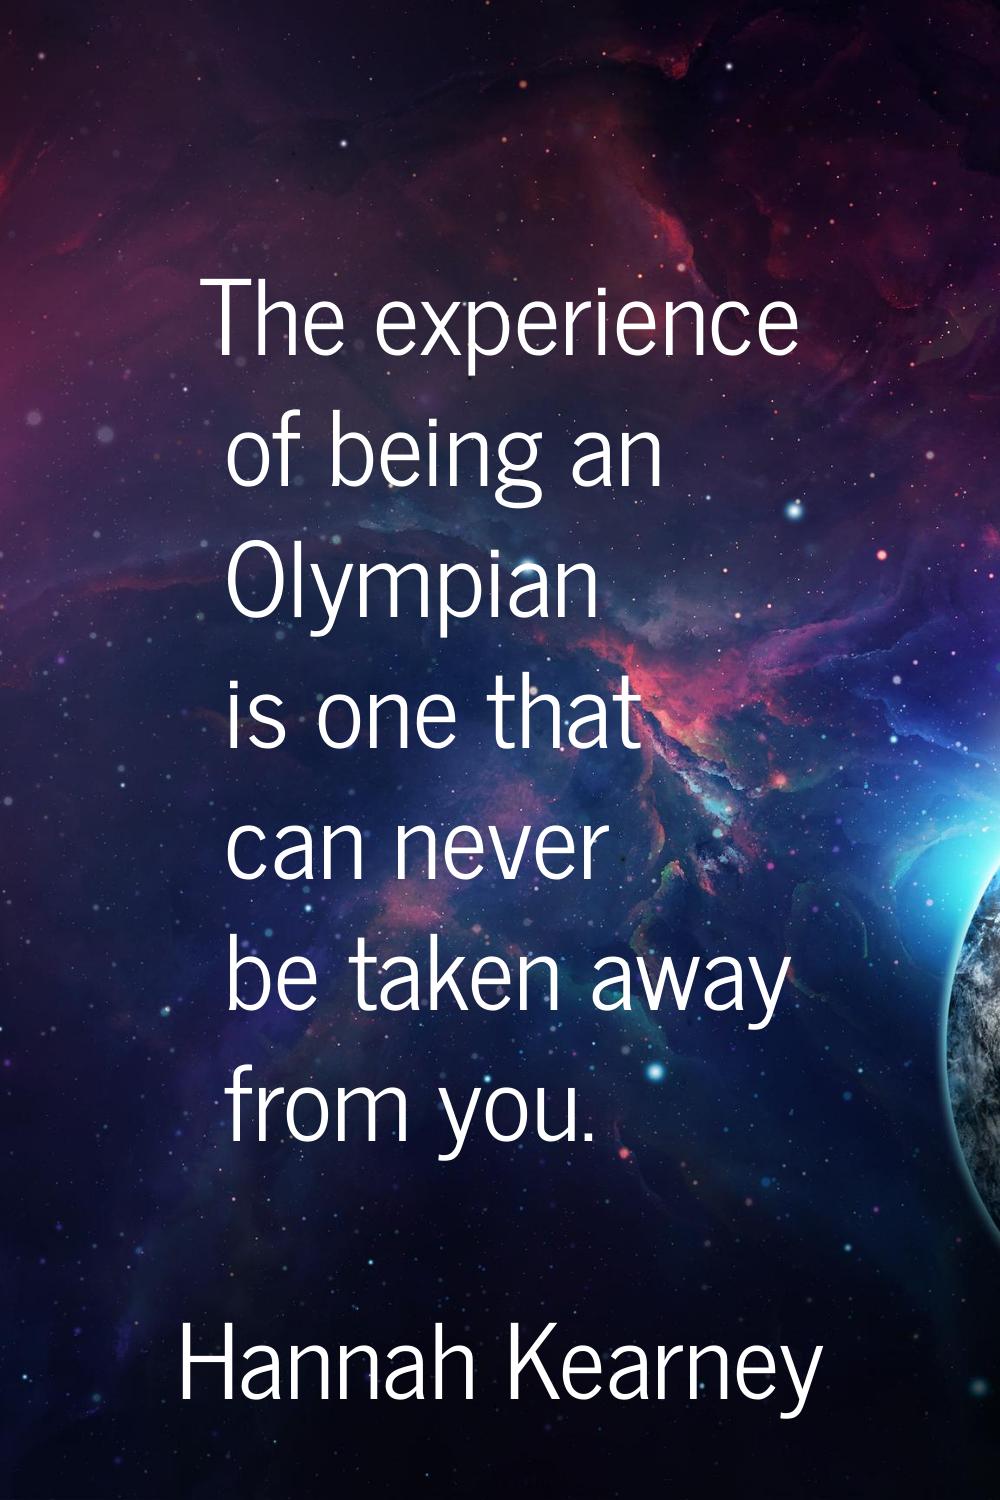 The experience of being an Olympian is one that can never be taken away from you.